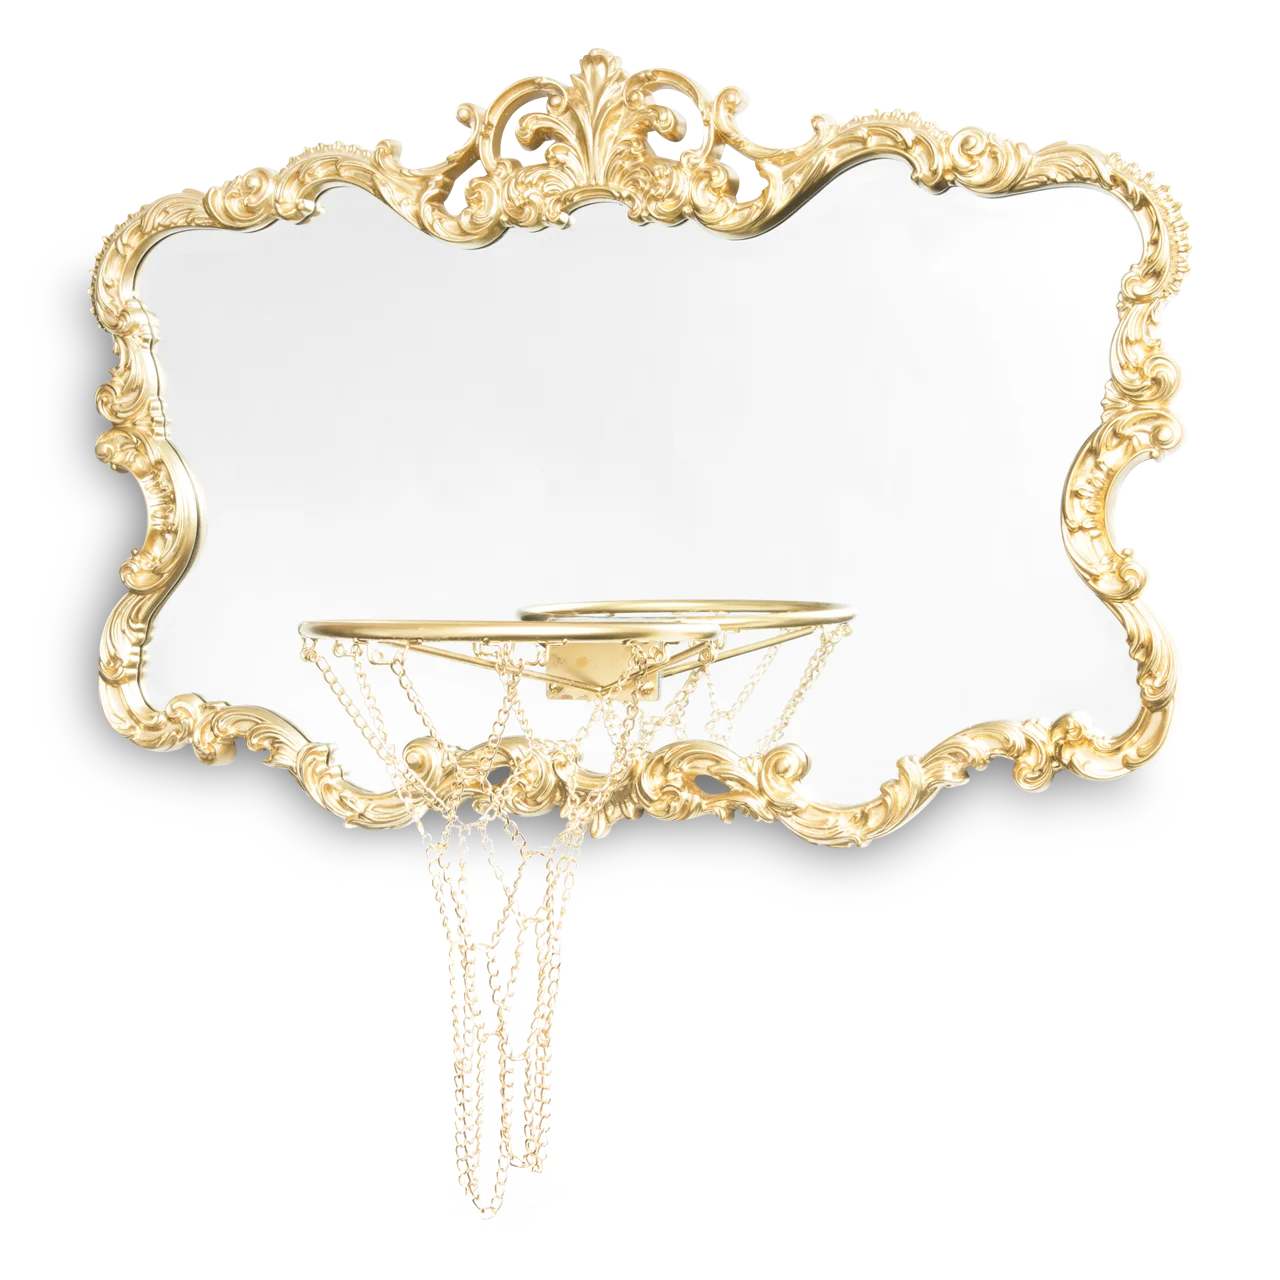 A Gold Mirror Hoop adorned with a basketball hoop.